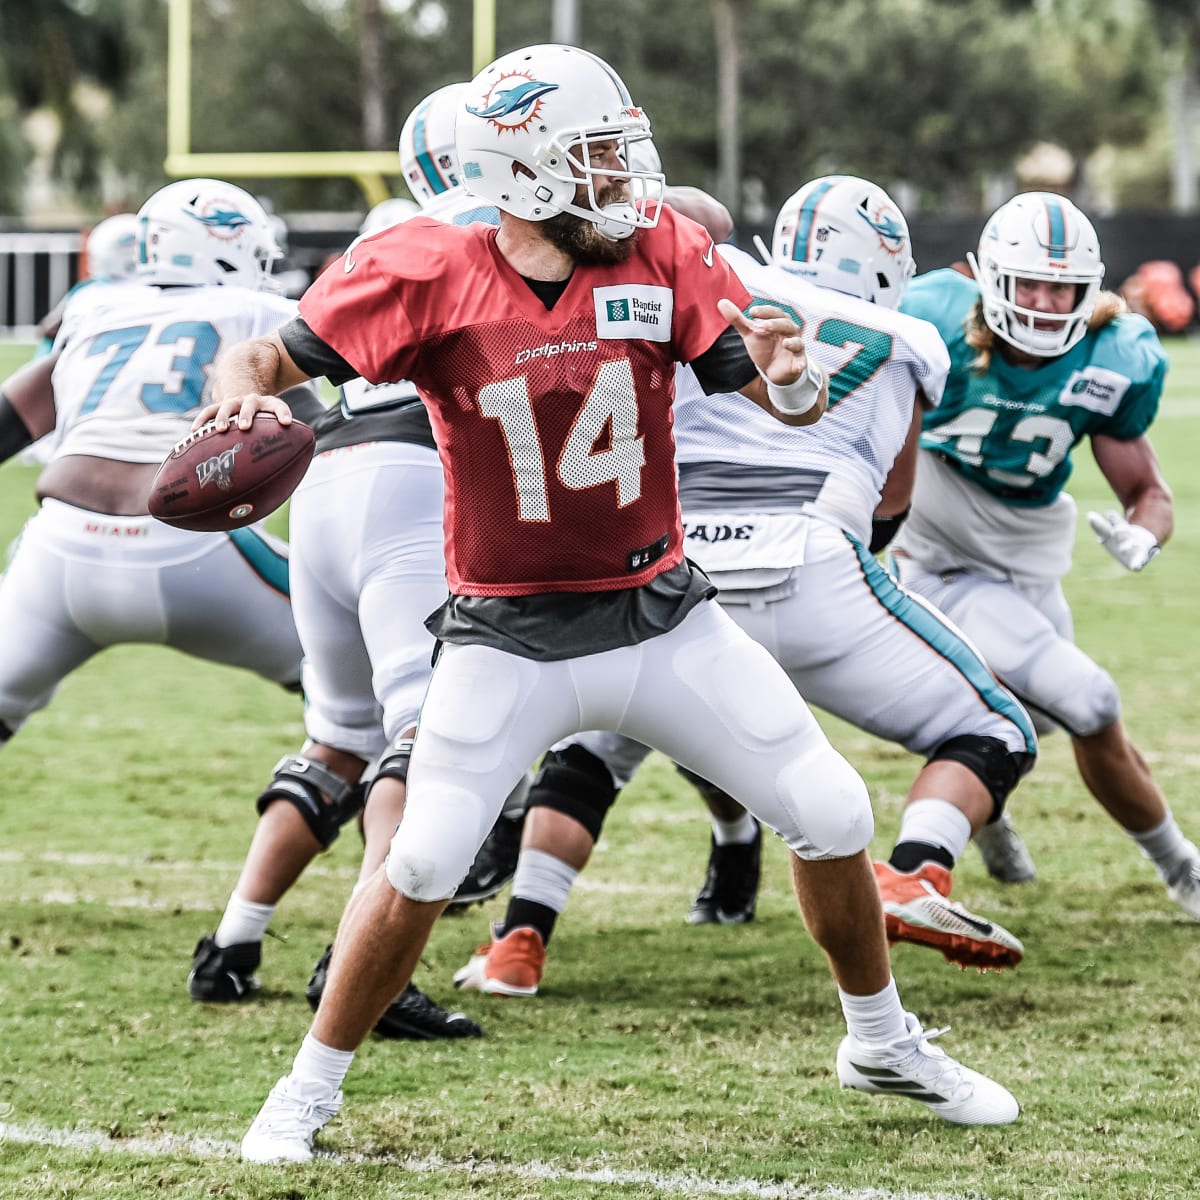 Dolphins starting QB: Team announces Ryan Fitzpatrick to start in